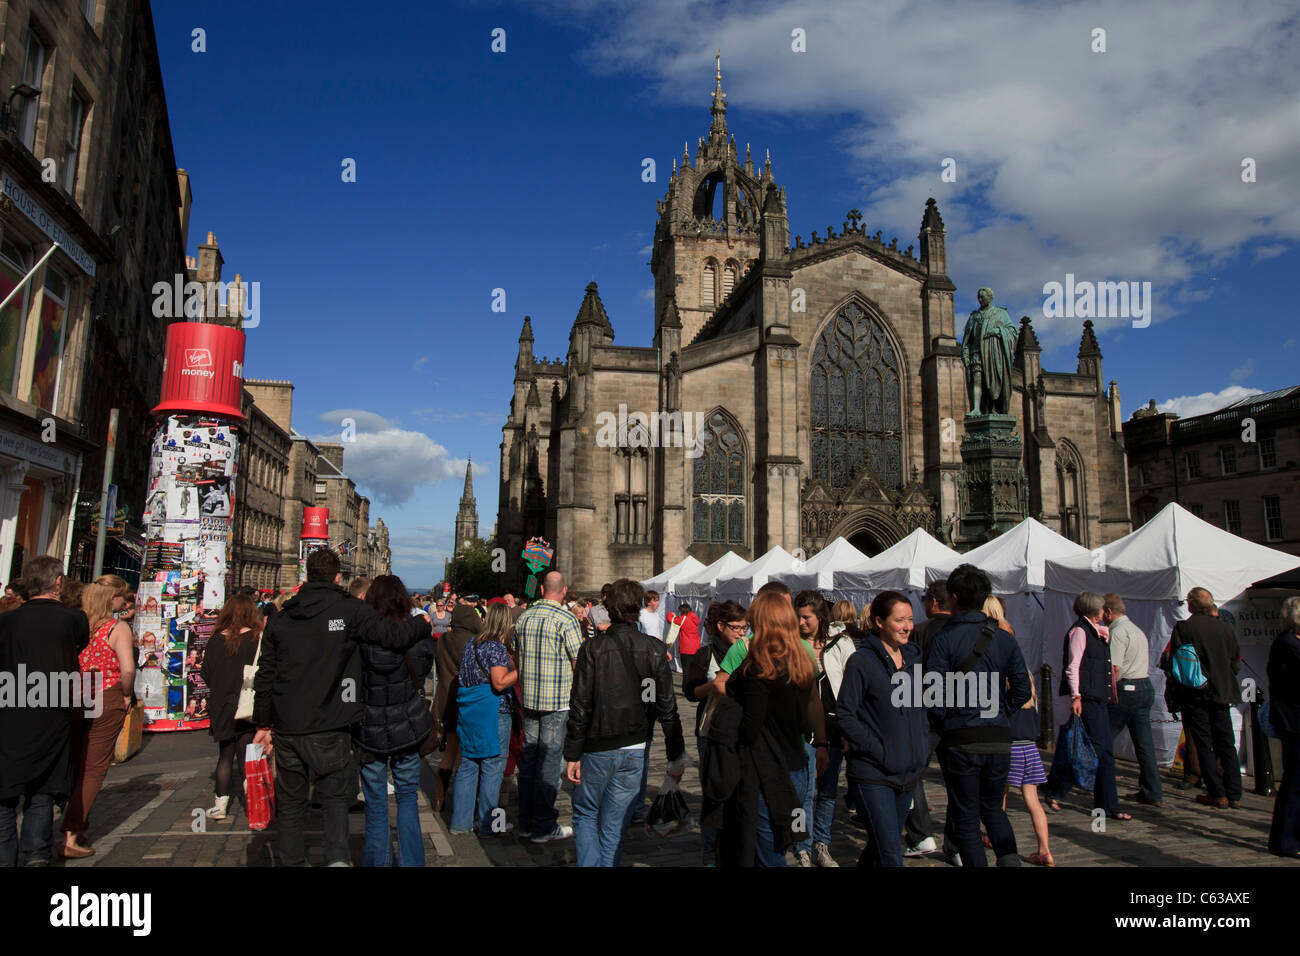 St. Giles Cathedral stands out amongst the visitors to Edinburgh's High Street during the 2011 Edinburgh Festival. Stock Photo